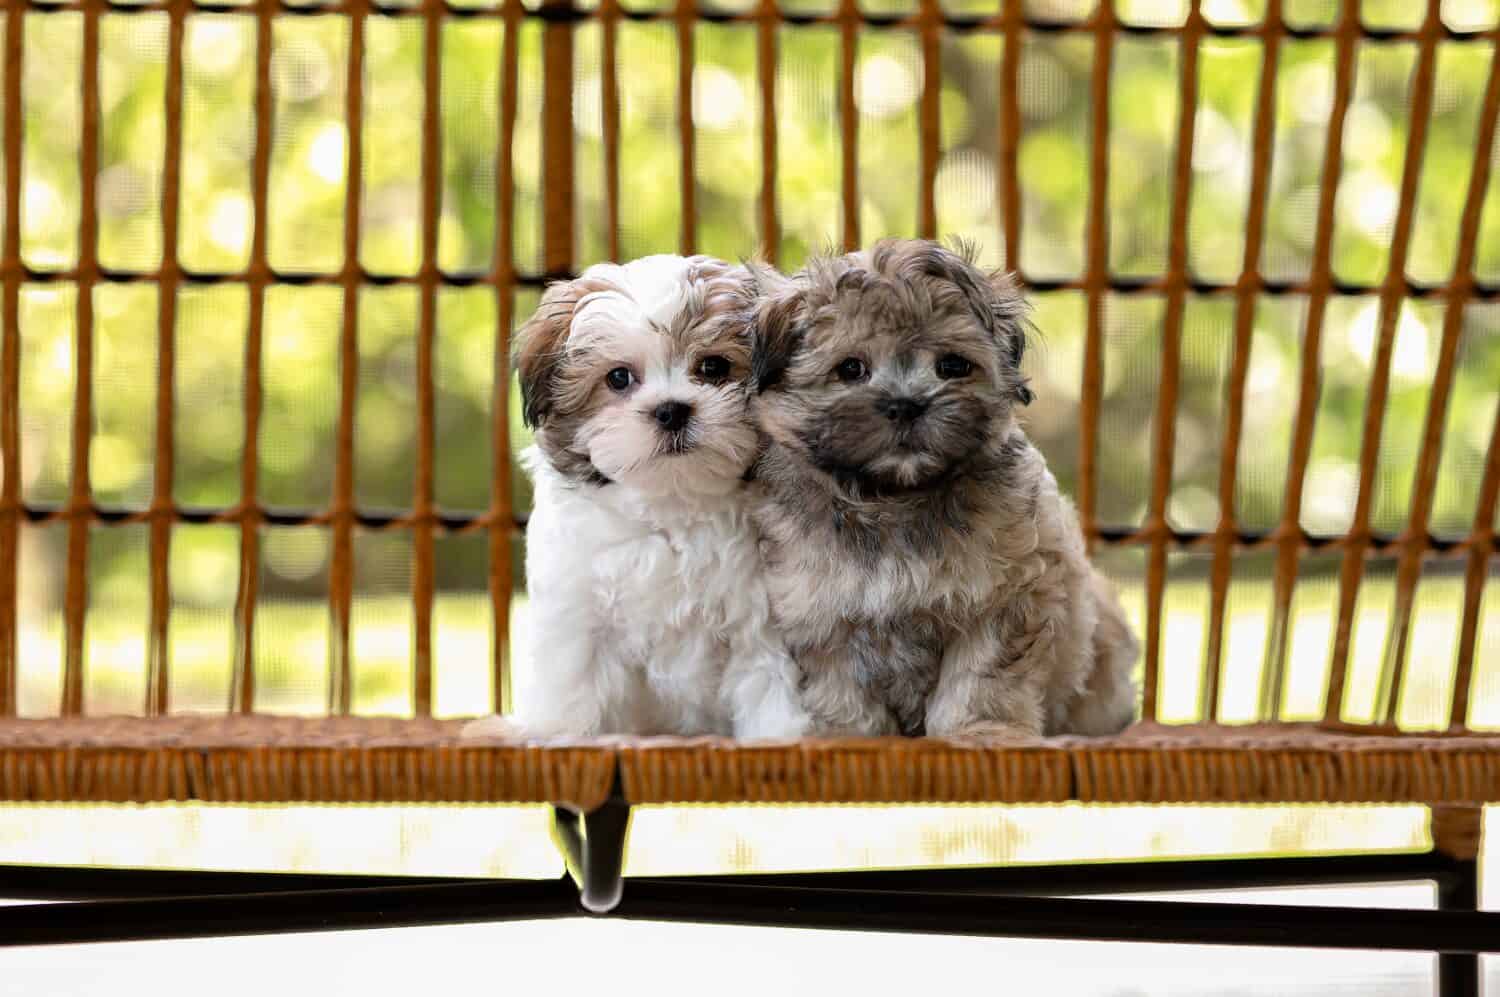 A group of adorable Shih-tzu puppies for adoption posing on the bench and looking at the camera outdoors during the day	